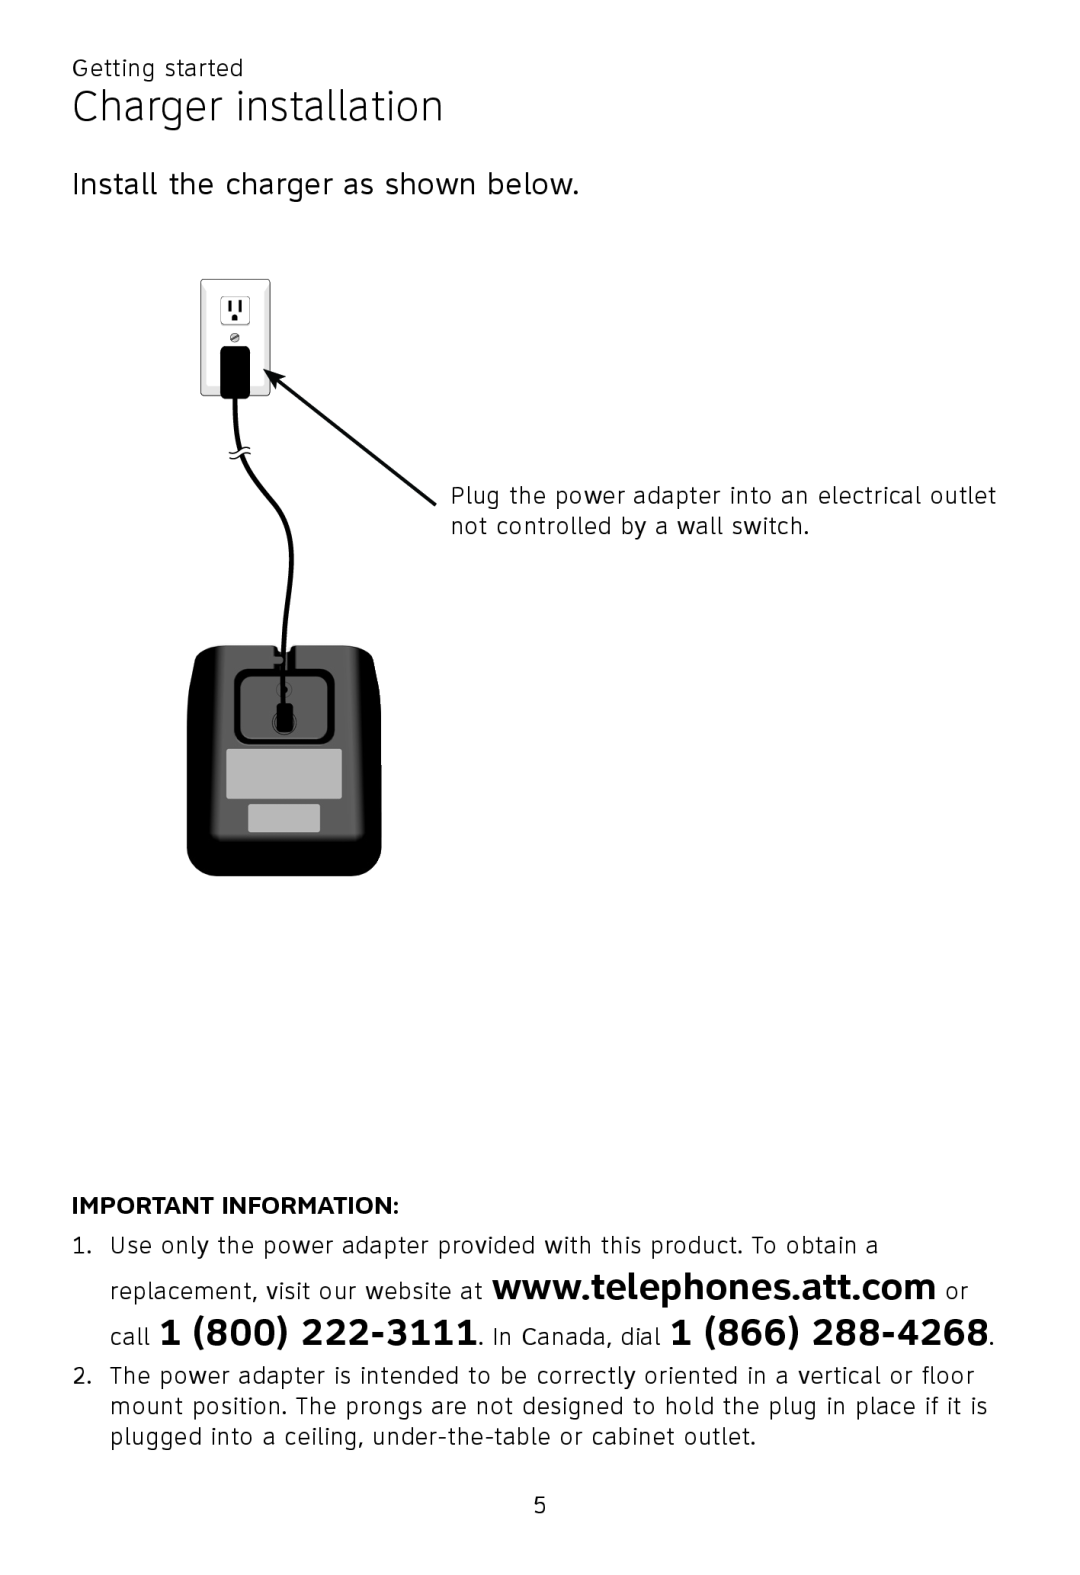 AT&T TL86109, TL86009, TL 86009 Charger installation, call 1 800 222-3111. In Canada, dial 1, Important Information 